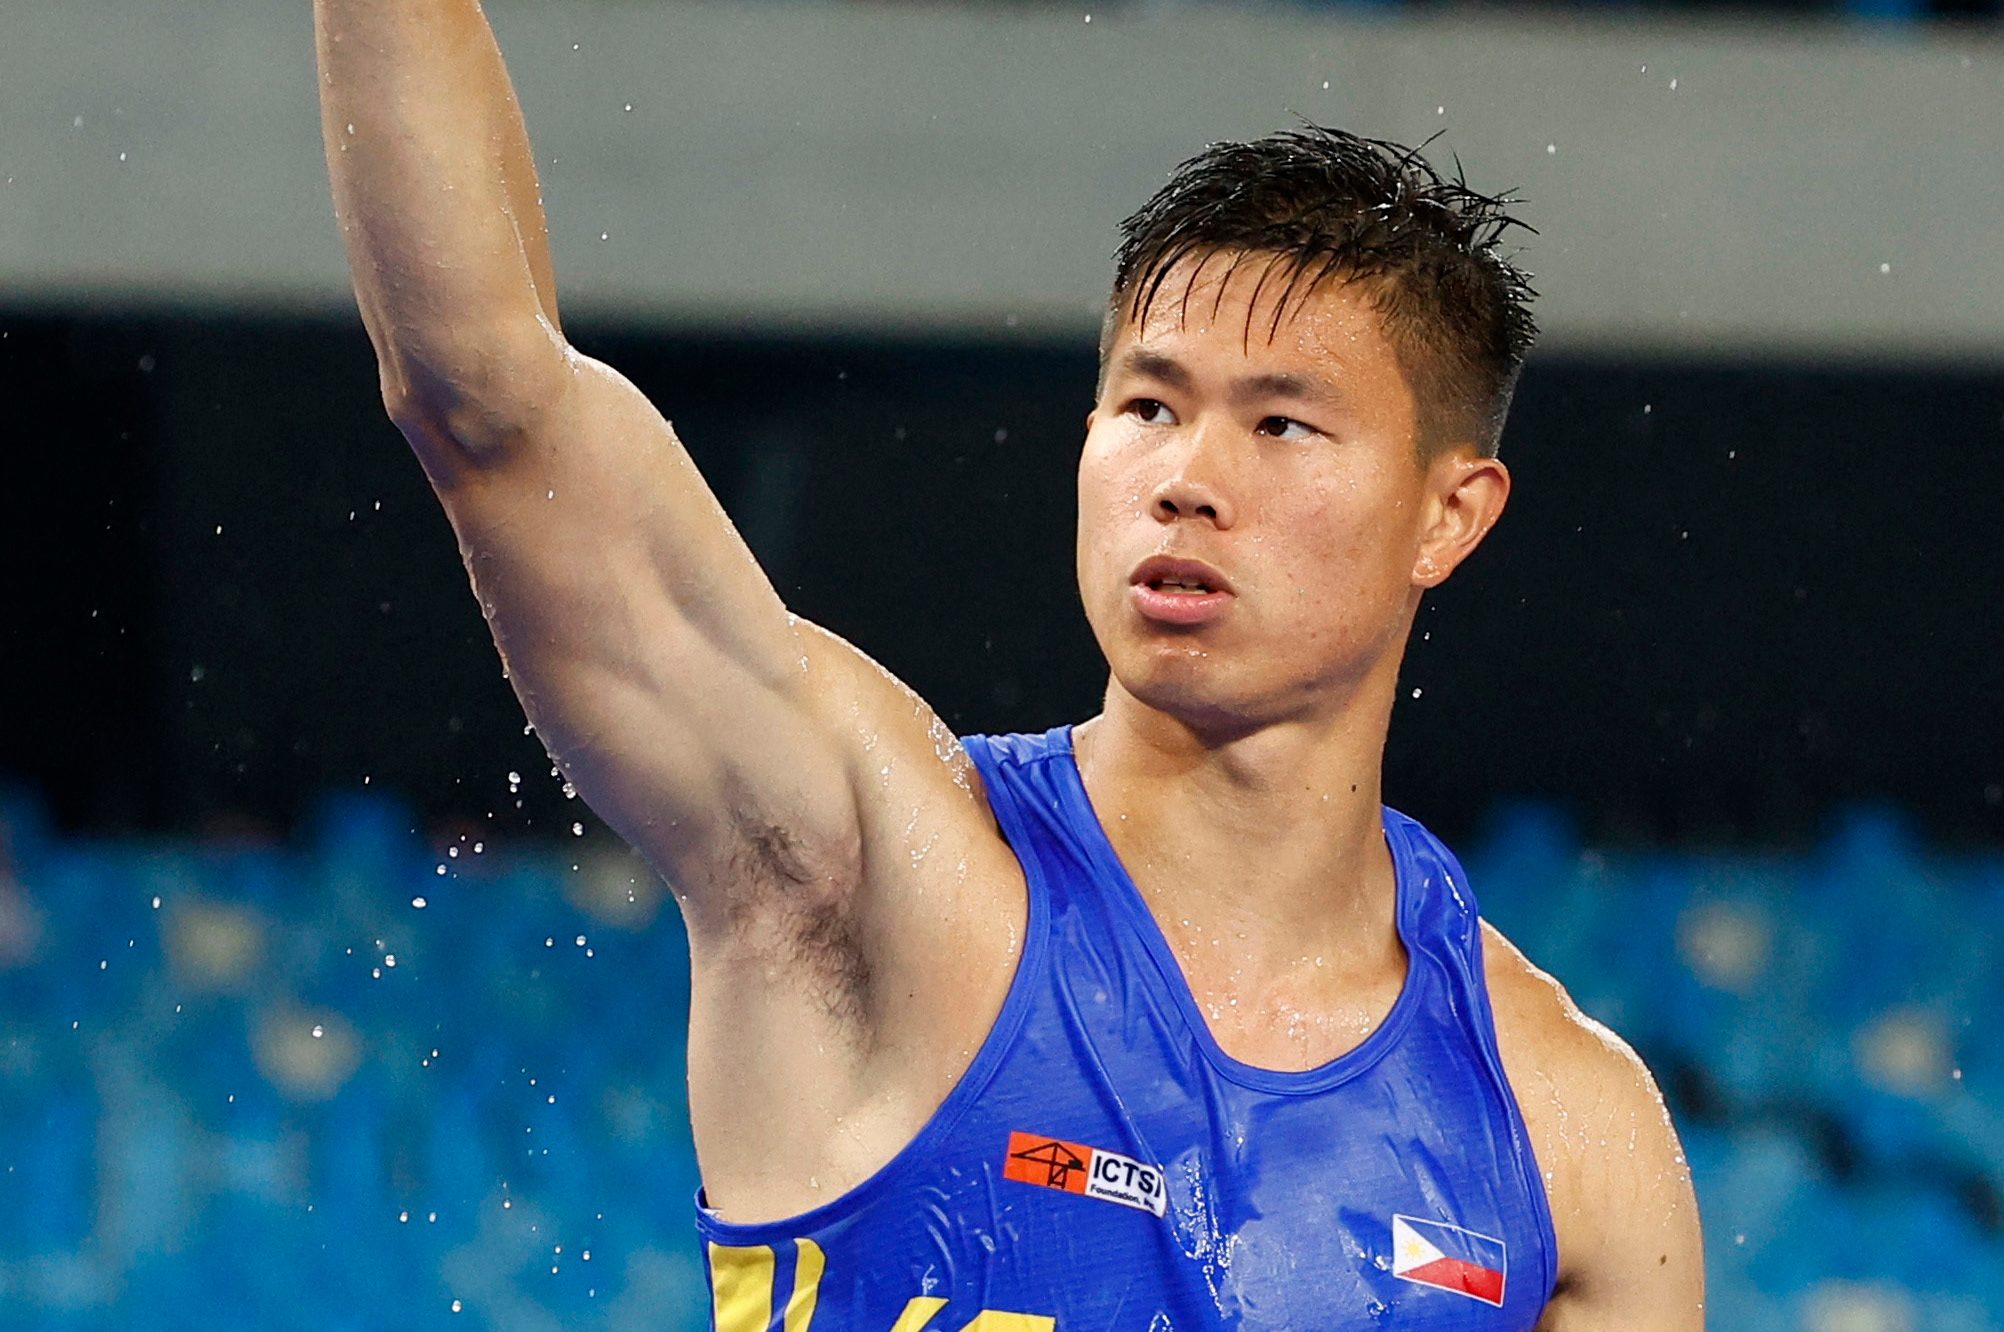 EJ Obiena earns Paris Olympics berth with silver vault in Sweden